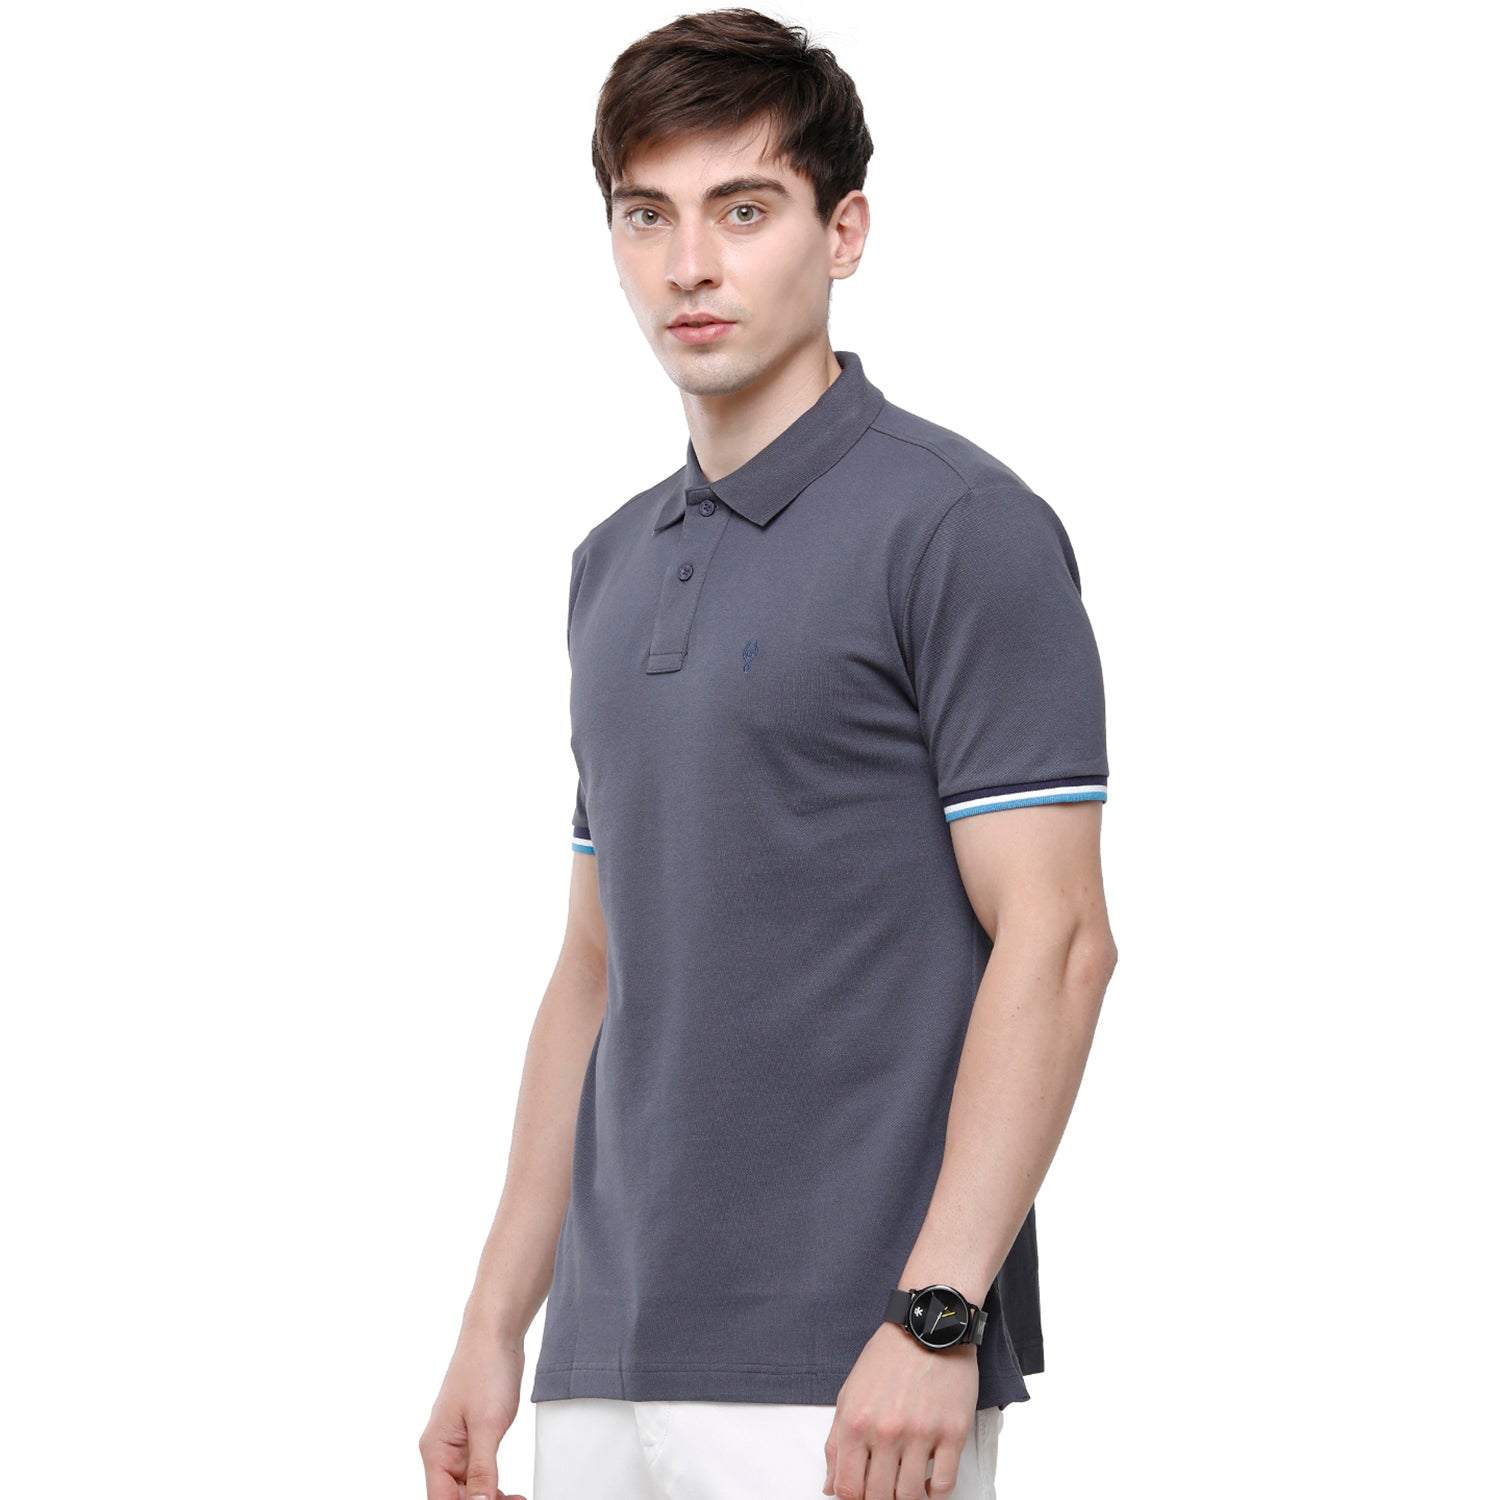 Classic polo Men's Grey Lycra Cotton Stretch Polo Half Sleeve Slim Fit T-Shirt - Tarte Indian Ink T-shirt Classic Polo 